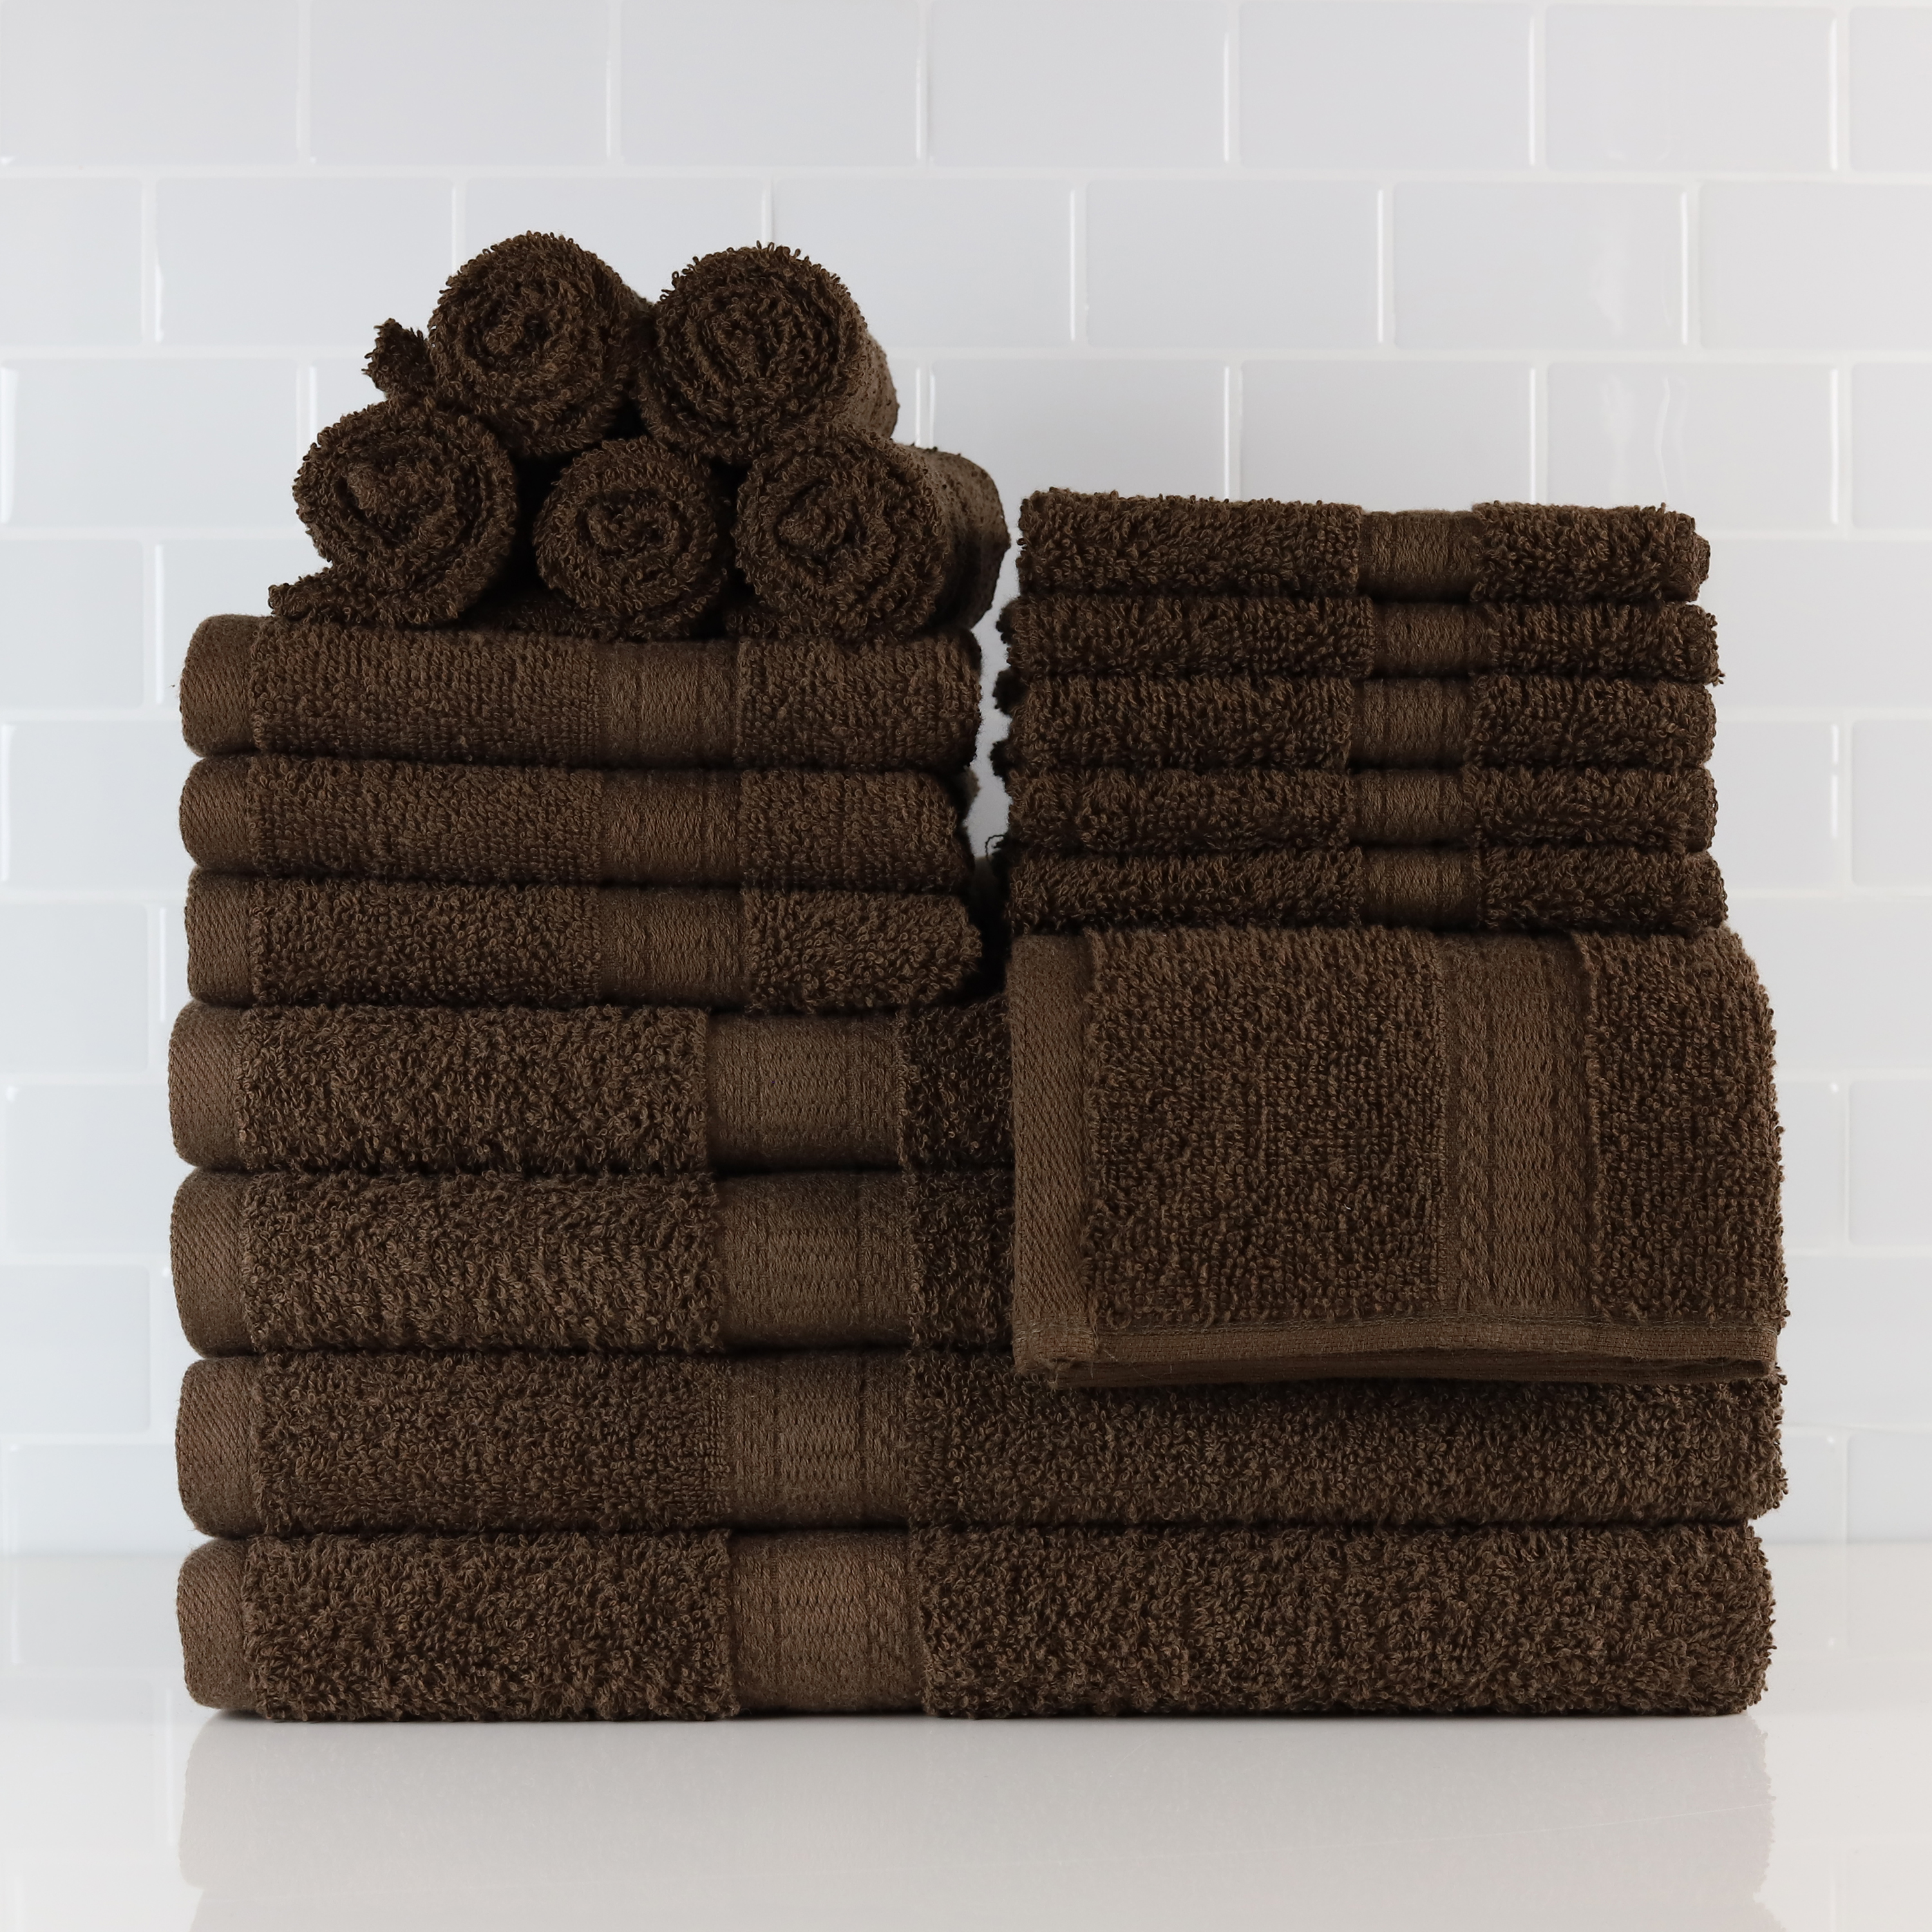 Mainstays Basic Solid 18-Piece Bath Towel Set Collection, Brown - image 10 of 10